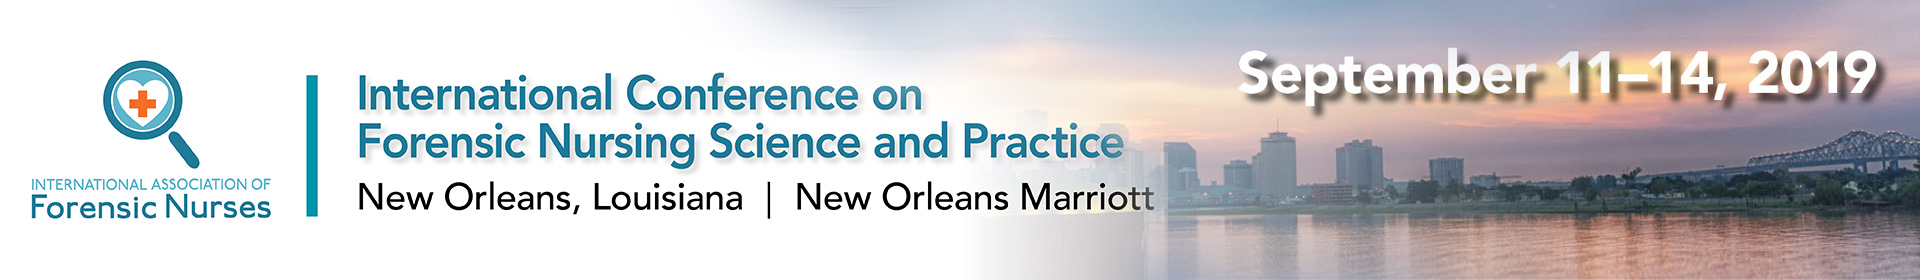 2019 International Conference on Forensic Nursing Science and Practice Event Banner